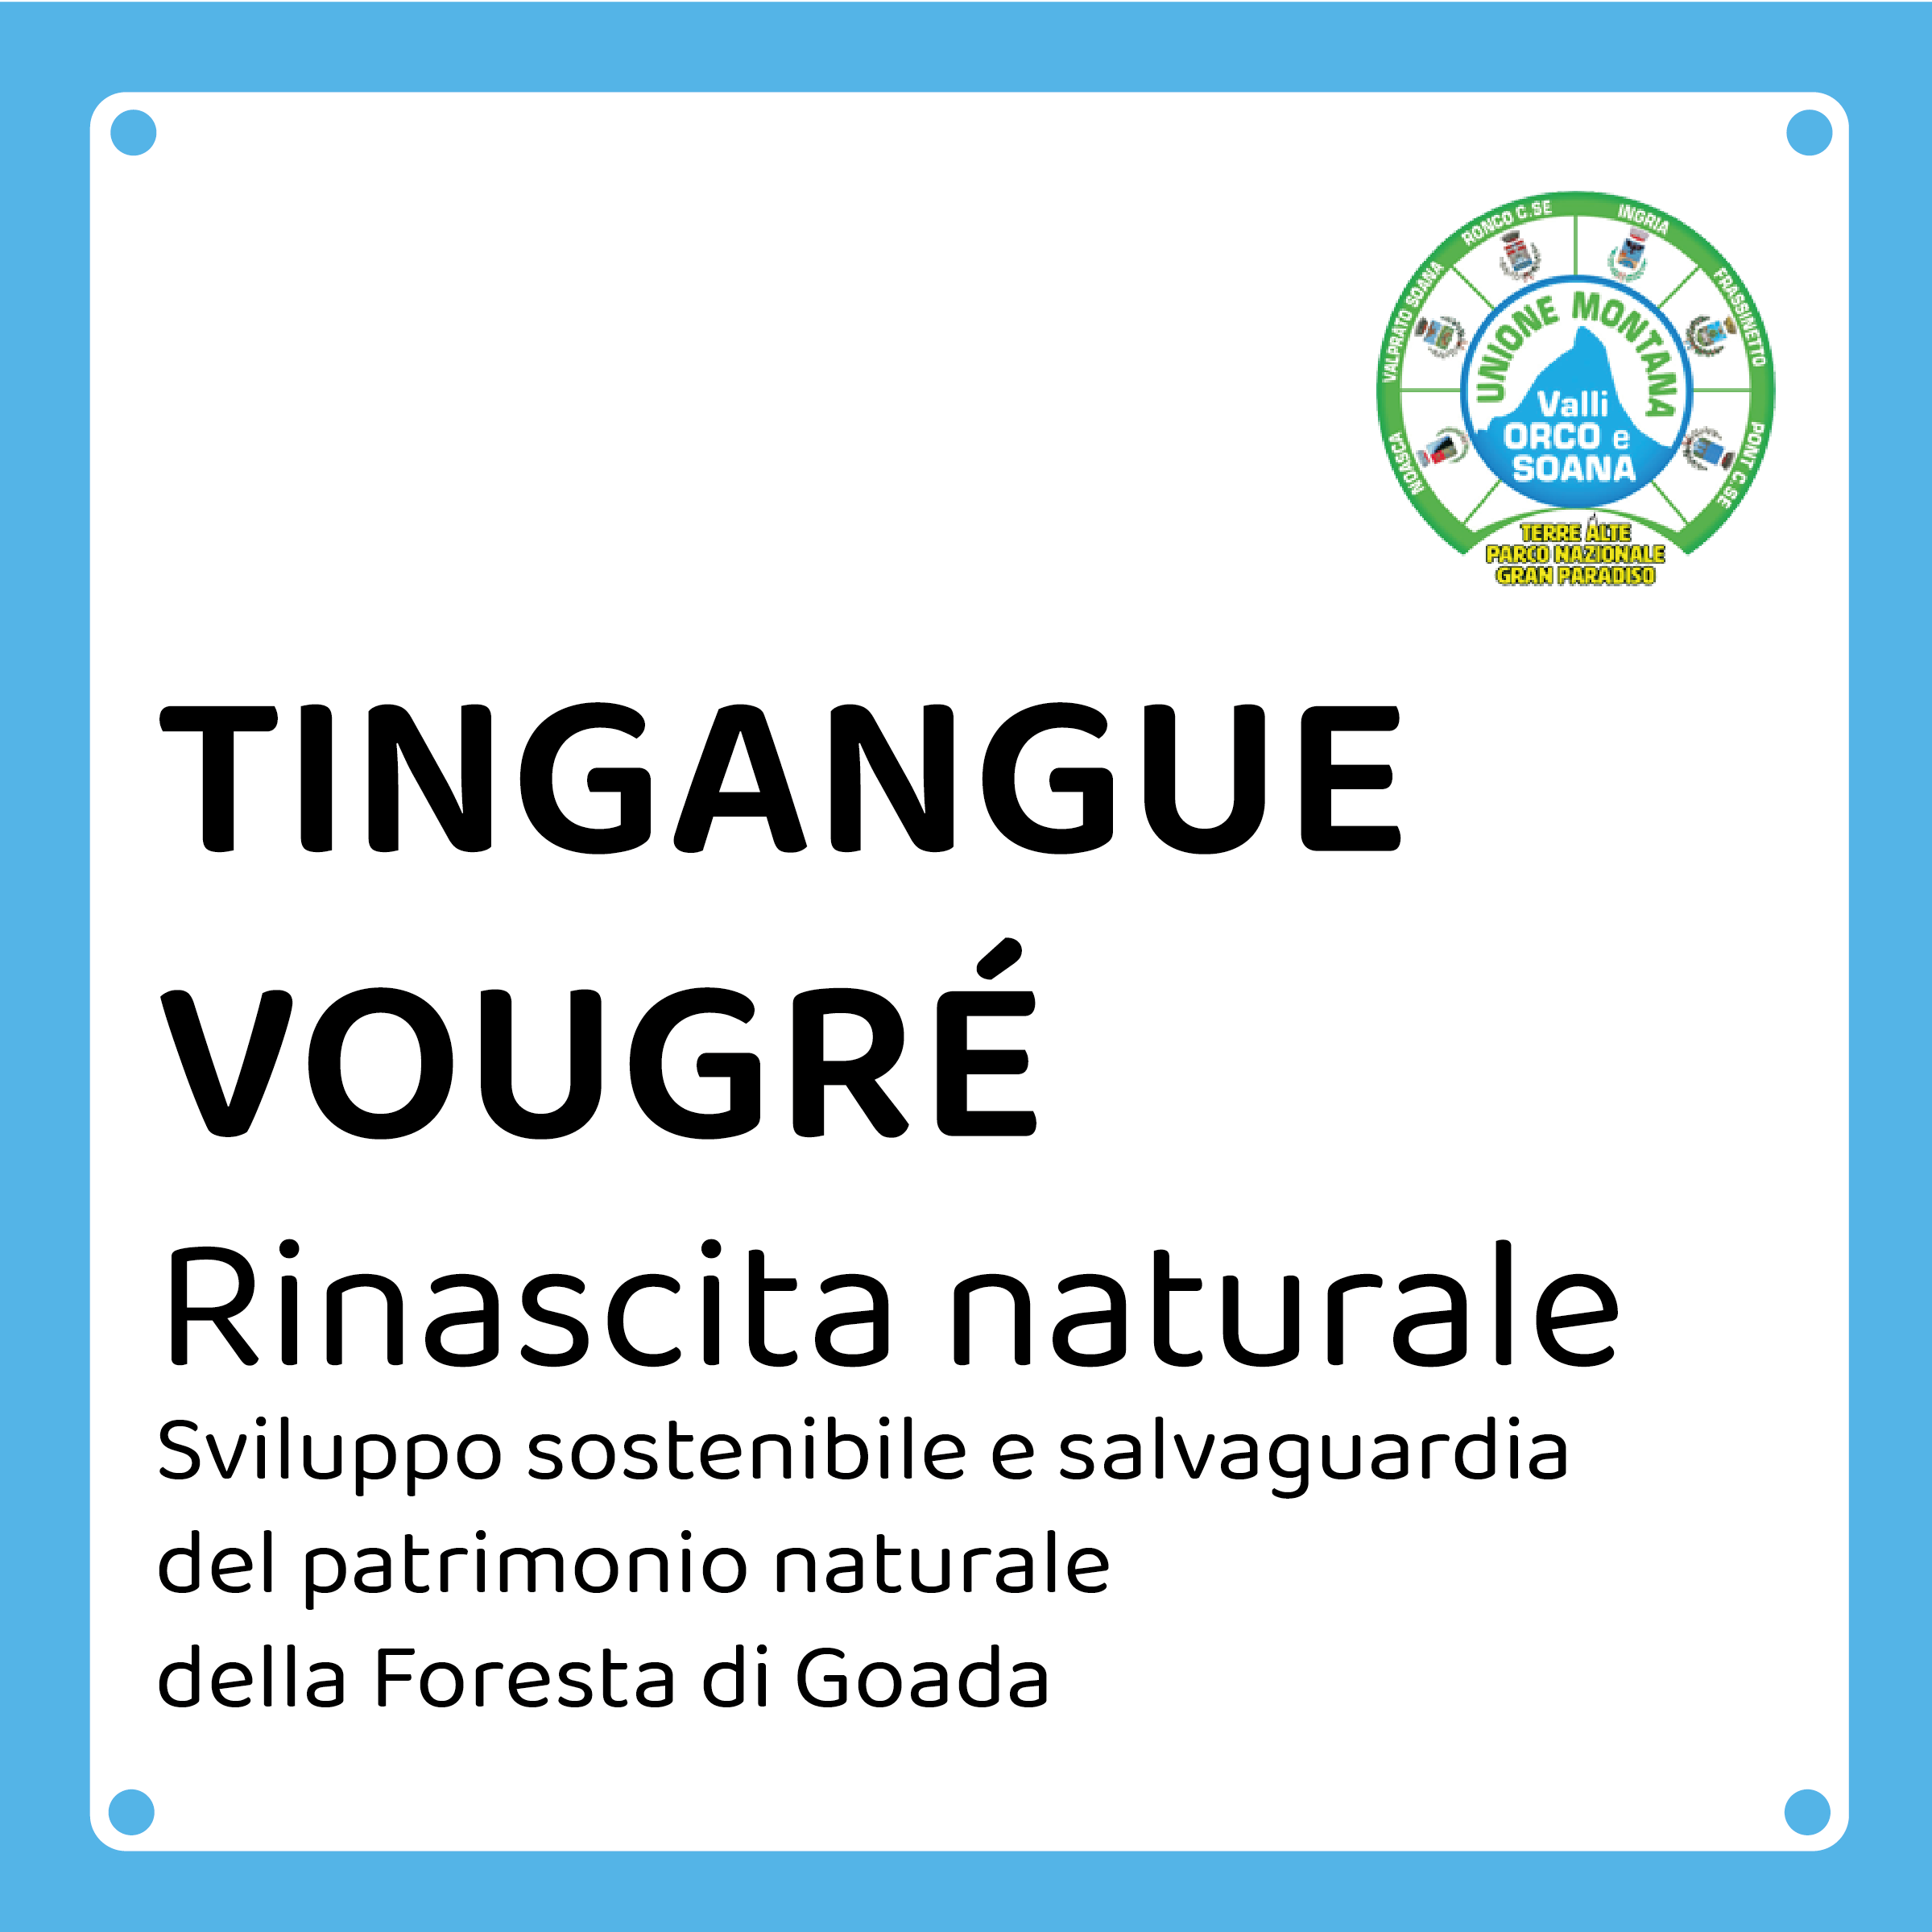 TINGANGUE VOUGRÉ - Natural Rebirth - Sustainable development and protection of the natural heritage of the Goada Forest